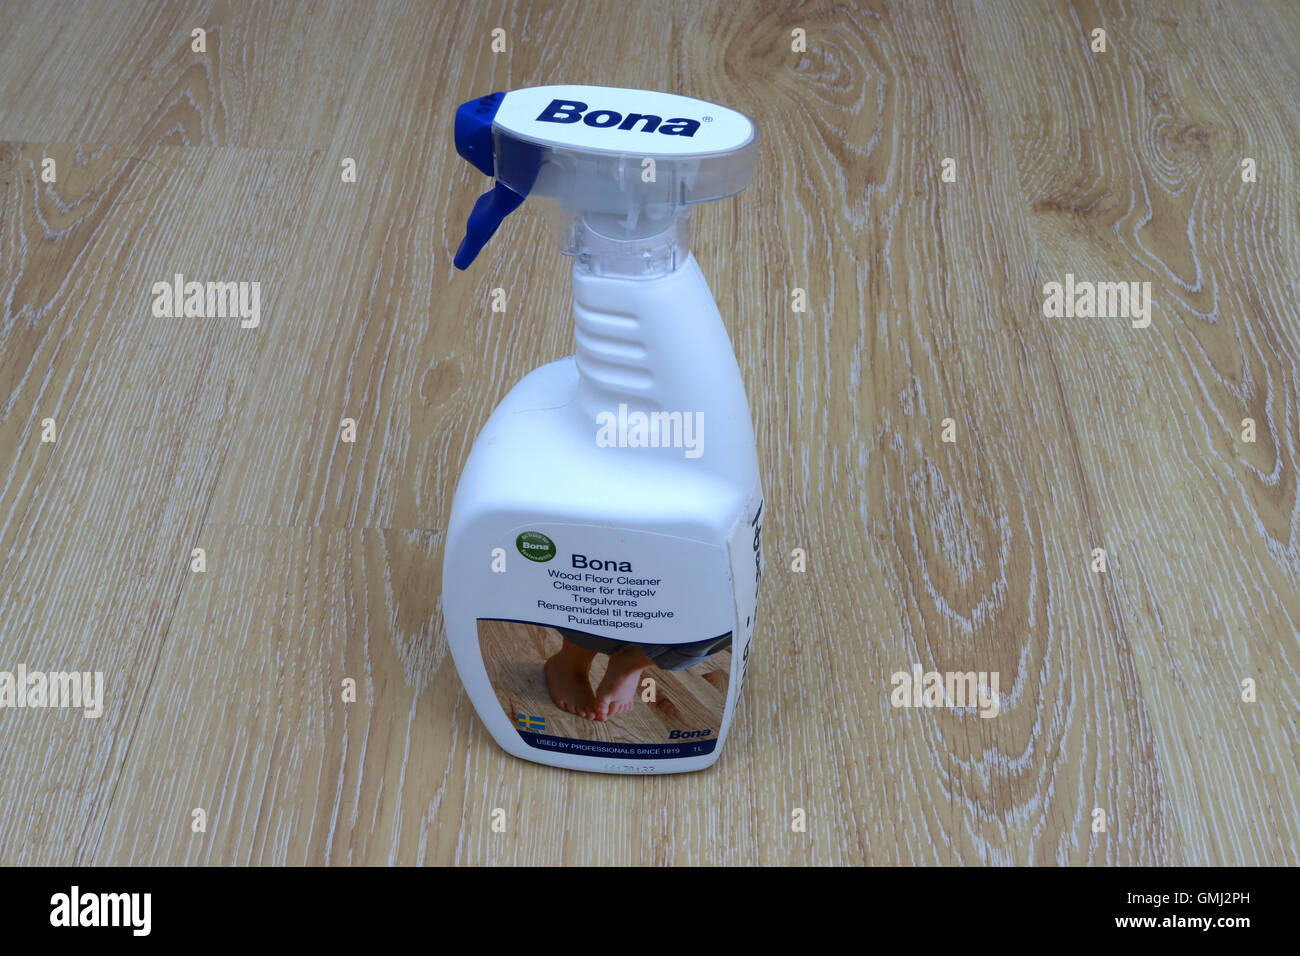 Bona Cleaning Spray For Wooden Floor Made In Sweden Stock Photo